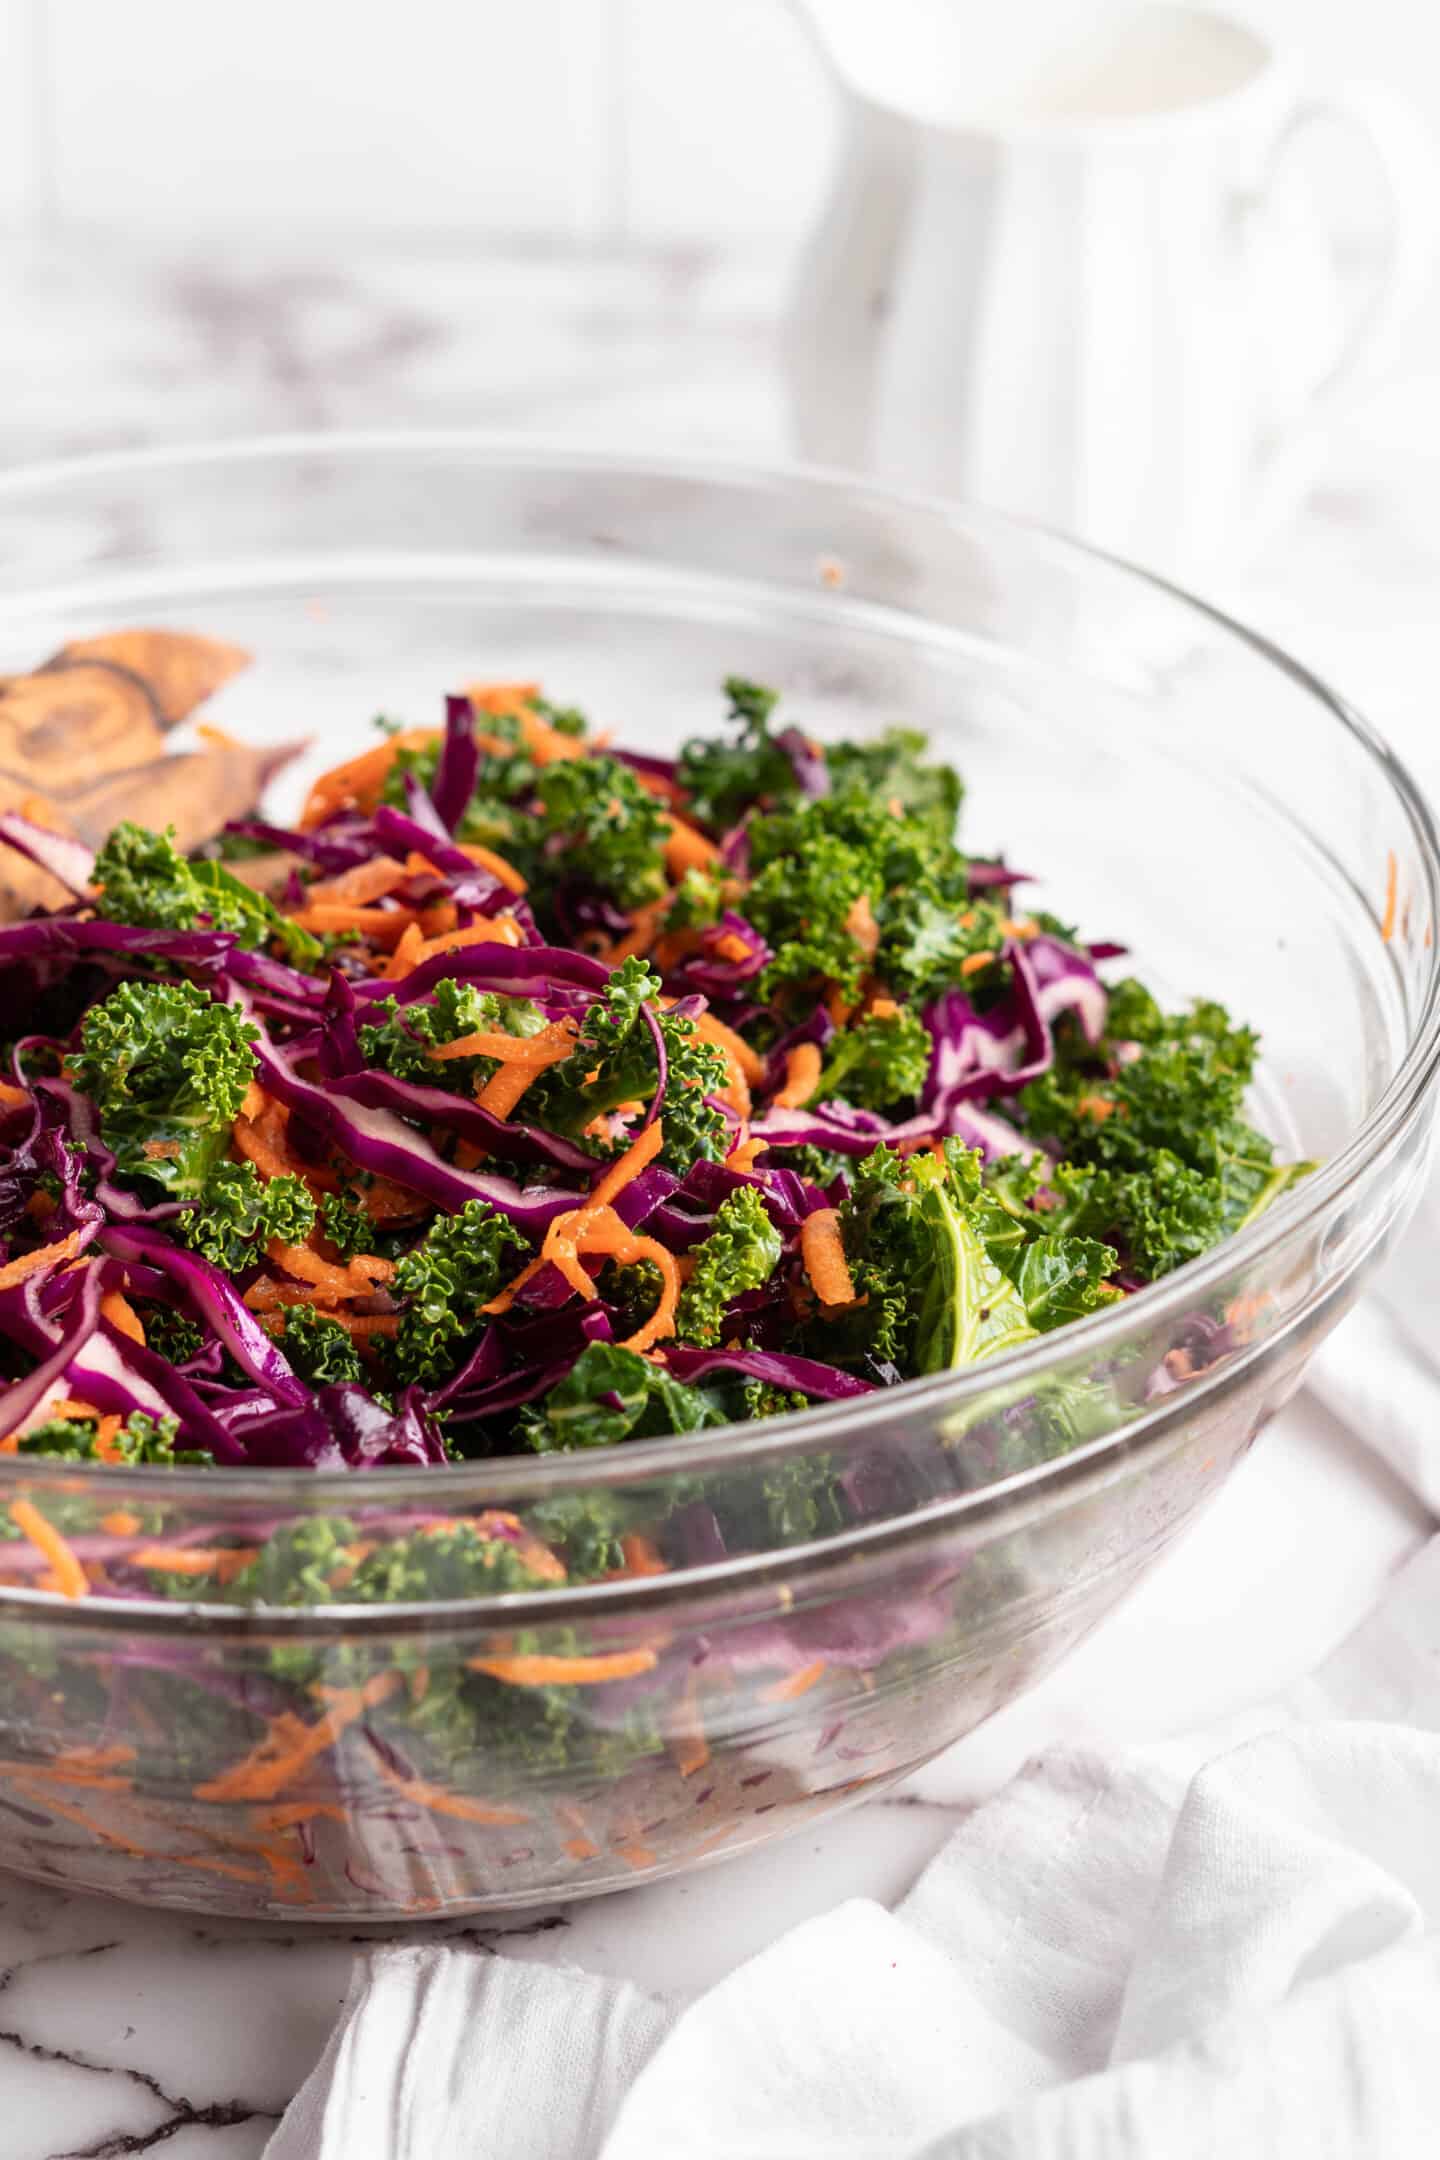 Healthy coleslaw in glass mixing bowl